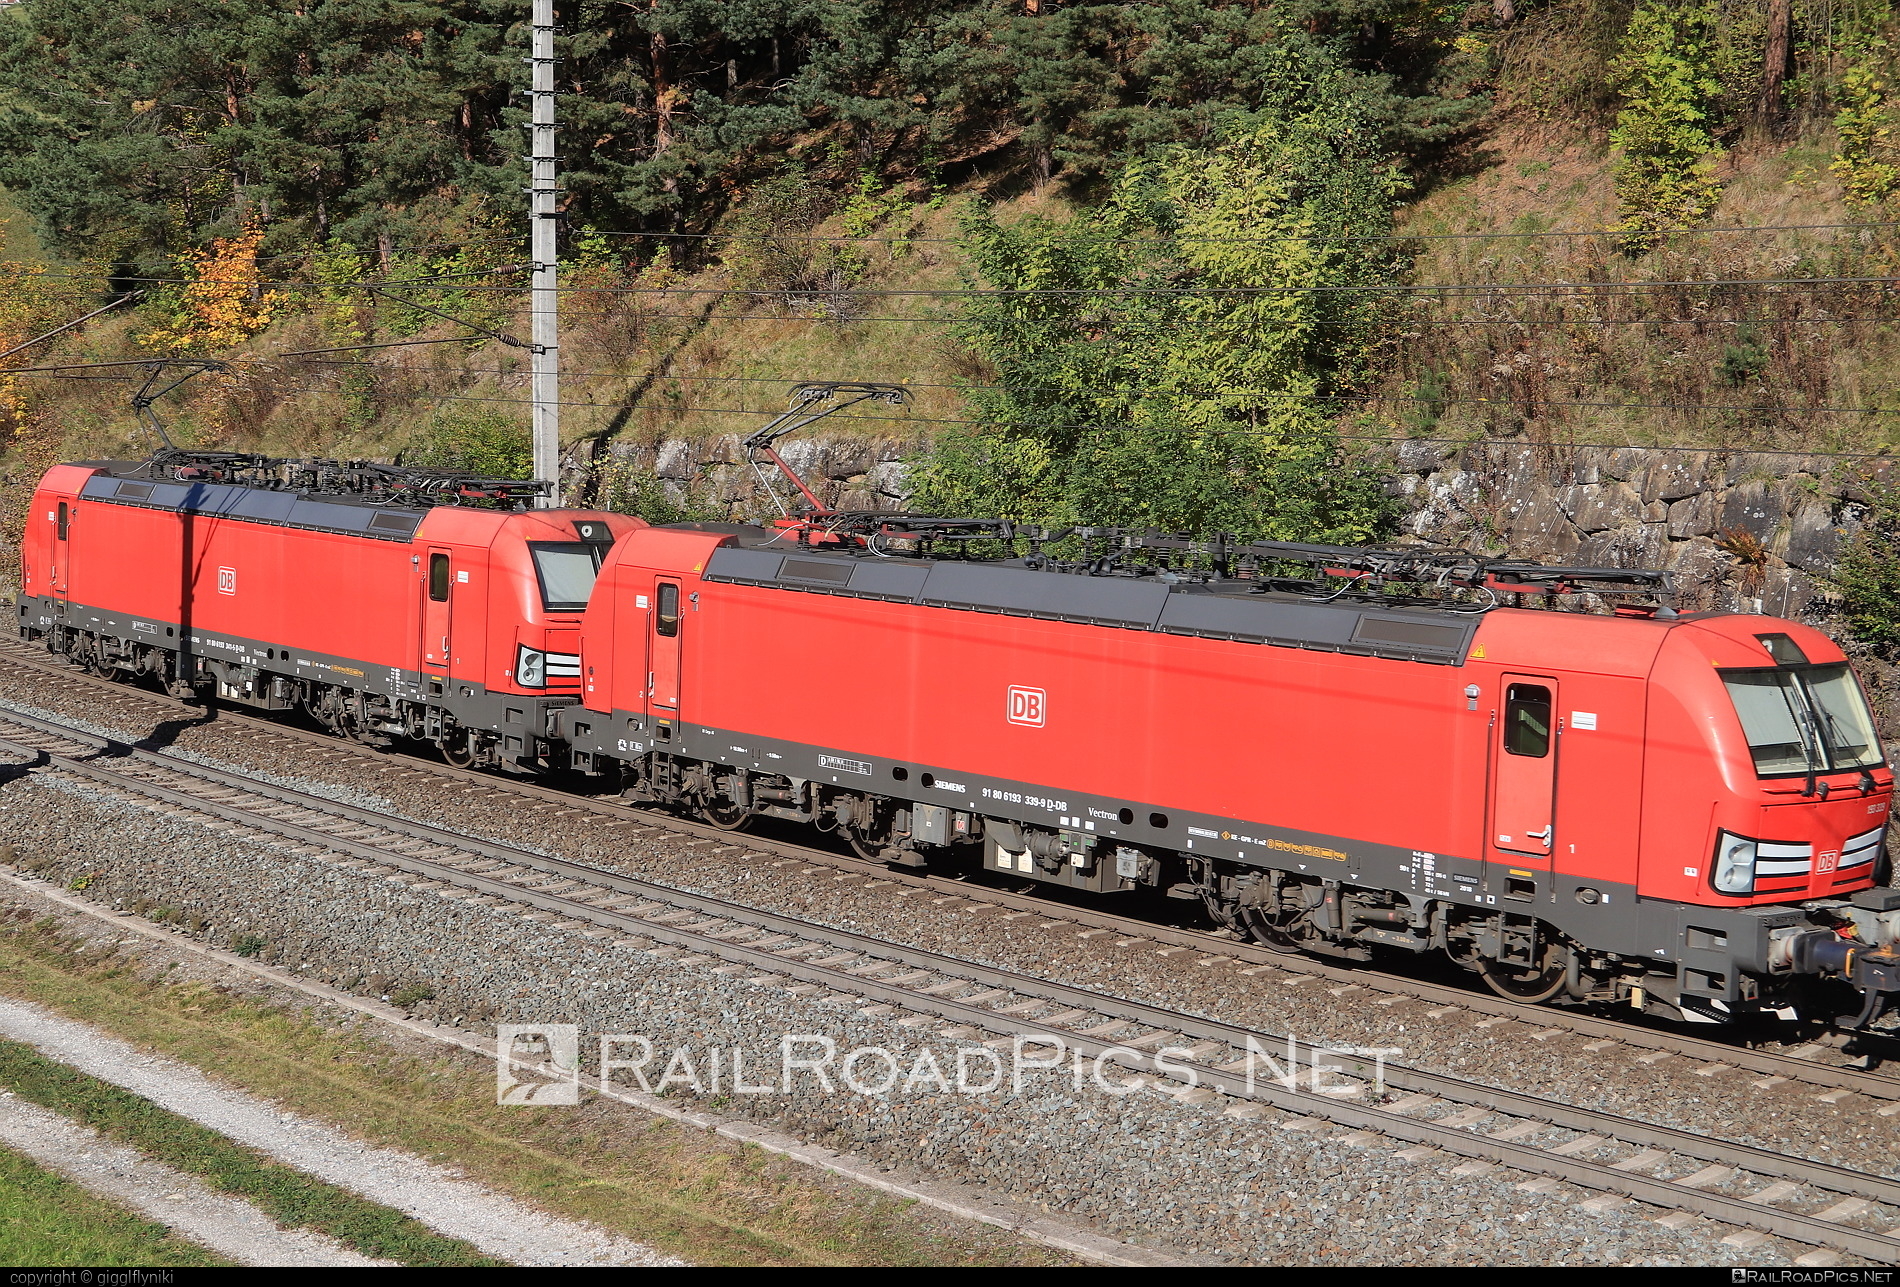 Siemens Vectron MS - 193 339 operated by DB Cargo AG #db #dbcargo #dbcargoag #deutschebahn #siemens #siemensVectron #siemensVectronMS #vectron #vectronMS